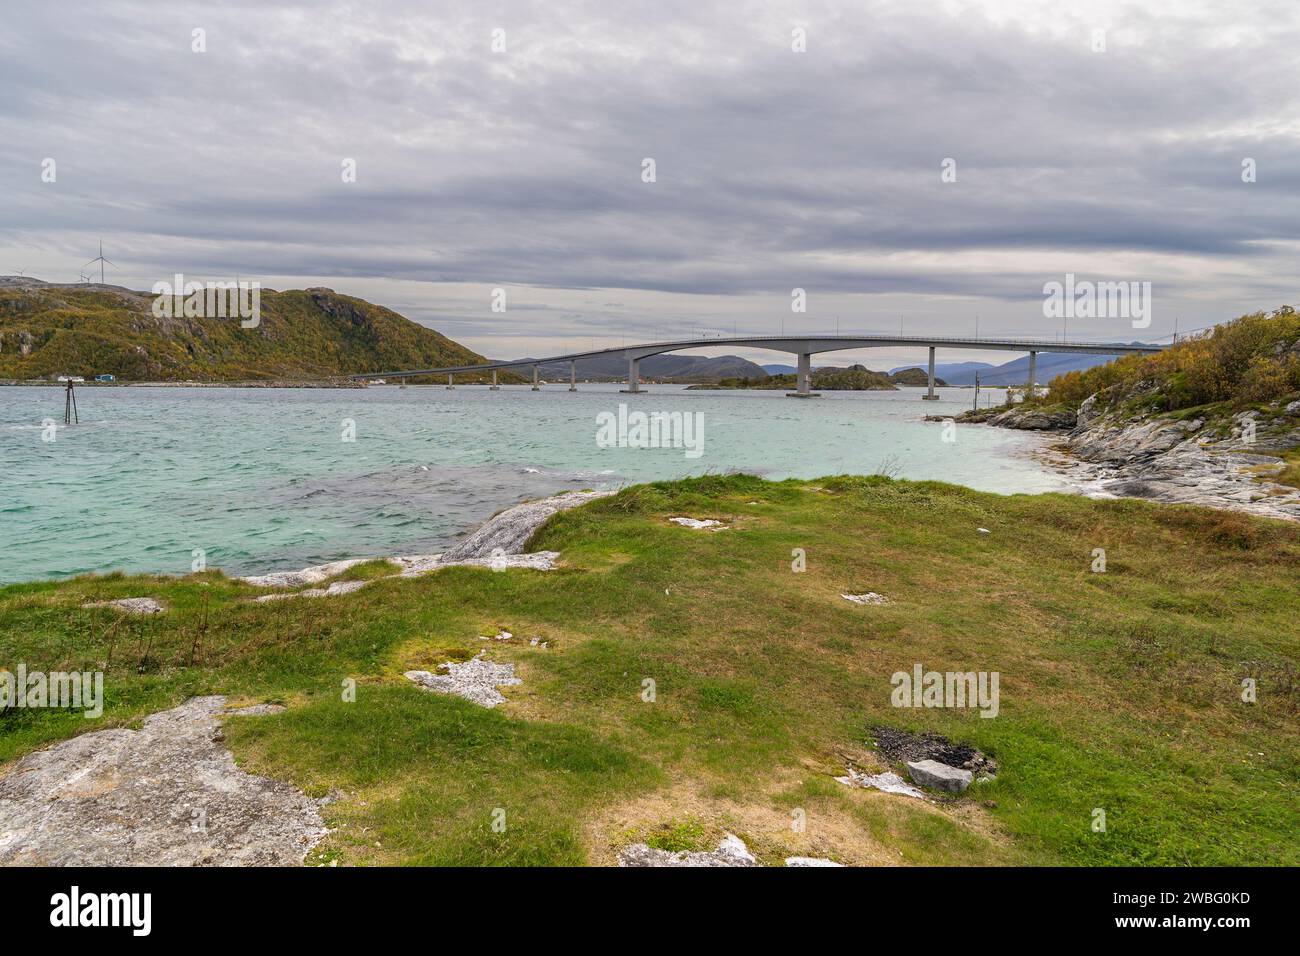 the bridge of Sommarøy, it curves majestically and crosses the Atlantic on the coast of Troms, Norway. autumnal colored plants on the shore of ocean Stock Photo